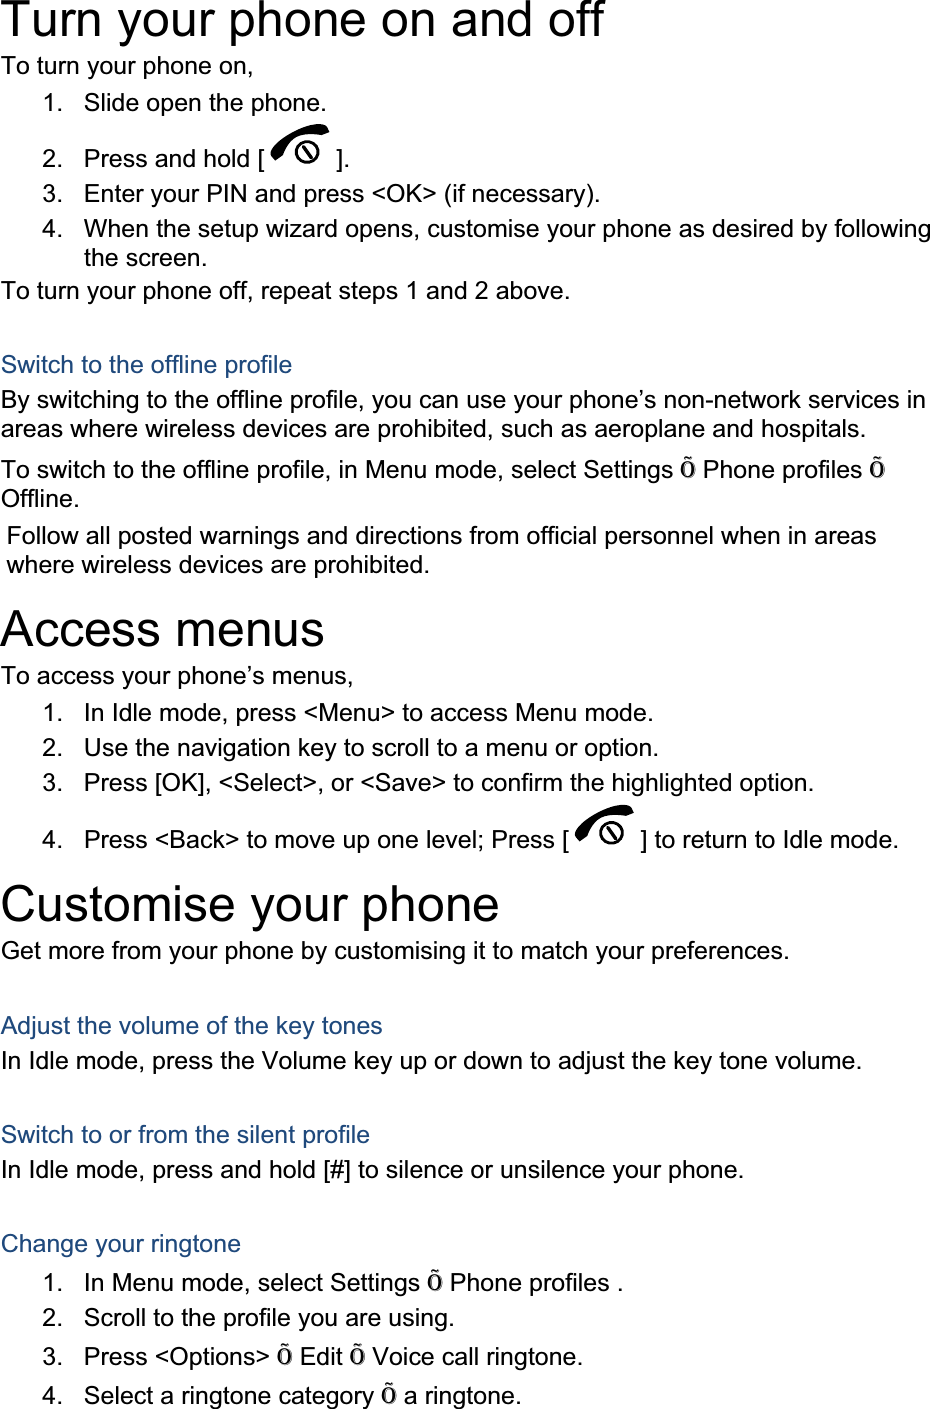 Turn your phone on and off To turn your phone on, 1.  Slide open the phone. 2.  Press and hold [ ].3.  Enter your PIN and press &lt;OK&gt; (if necessary). 4.  When the setup wizard opens, customise your phone as desired by following the screen. To turn your phone off, repeat steps 1 and 2 above. Switch to the offline profile By switching to the offline profile, you can use your phone’s non-network services in areas where wireless devices are prohibited, such as aeroplane and hospitals. To switch to the offline profile, in Menu mode, select Settings Õ Phone profiles ÕOffline.Follow all posted warnings and directions from official personnel when in areas where wireless devices are prohibited. Access menus To access your phone’s menus, 1.  In Idle mode, press &lt;Menu&gt; to access Menu mode. 2.  Use the navigation key to scroll to a menu or option. 3.  Press [OK], &lt;Select&gt;, or &lt;Save&gt; to confirm the highlighted option. 4.  Press &lt;Back&gt; to move up one level; Press [ ] to return to Idle mode. Customise your phone Get more from your phone by customising it to match your preferences. Adjust the volume of the key tones In Idle mode, press the Volume key up or down to adjust the key tone volume. Switch to or from the silent profile In Idle mode, press and hold [#] to silence or unsilence your phone. Change your ringtone 1.  In Menu mode, select Settings Õ Phone profiles . 2.  Scroll to the profile you are using. 3. Press &lt;Options&gt; Õ Edit Õ Voice call ringtone. 4.  Select a ringtone category Õ a ringtone. 